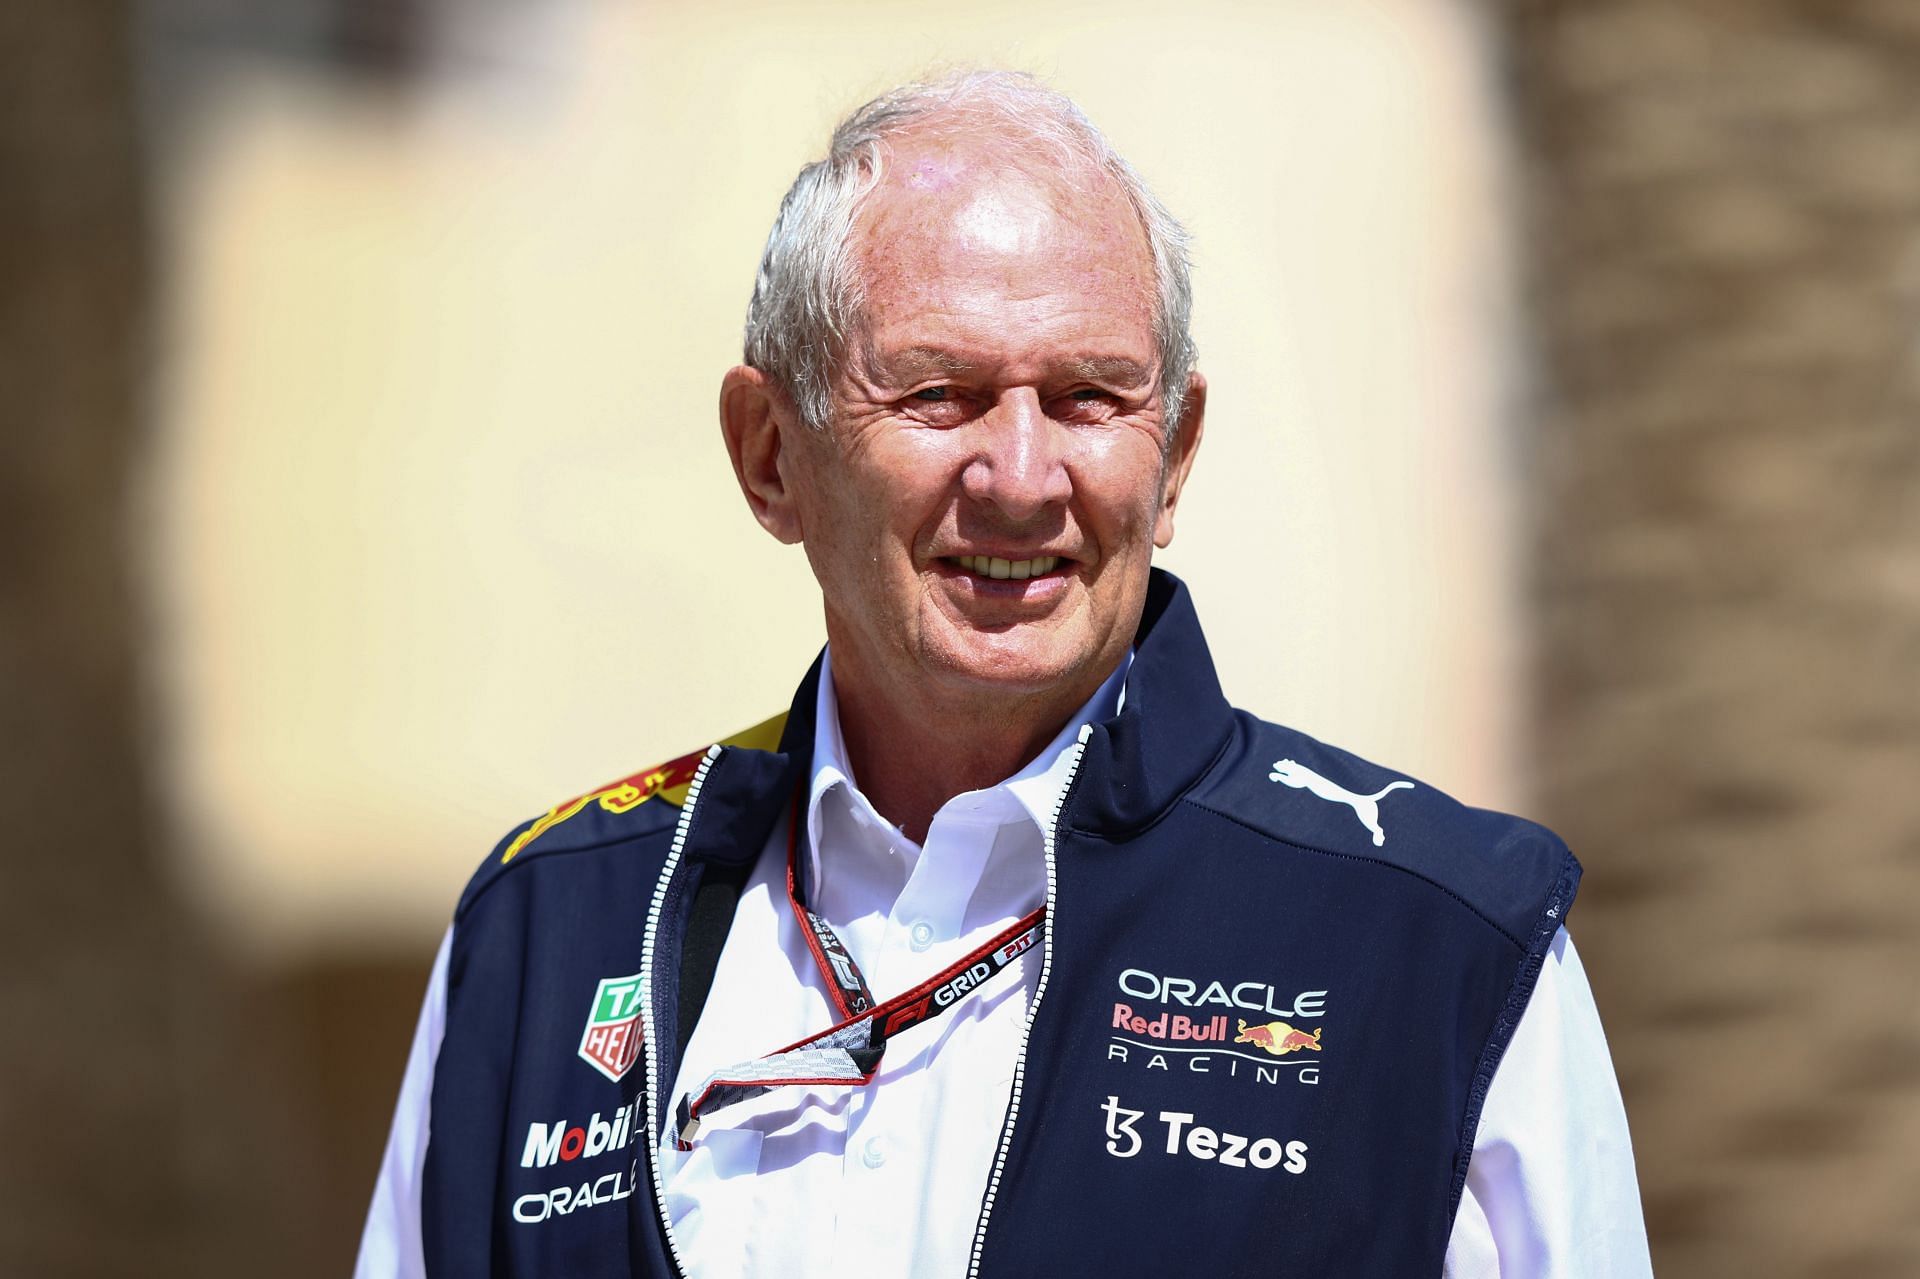 Helmut Marko looks on in the Paddock before practice ahead of the F1 Grand Prix of Bahrain at Bahrain International Circuit on March 18, 2022 in Bahrain, Bahrain. (Photo by Mark Thompson/Getty Images)